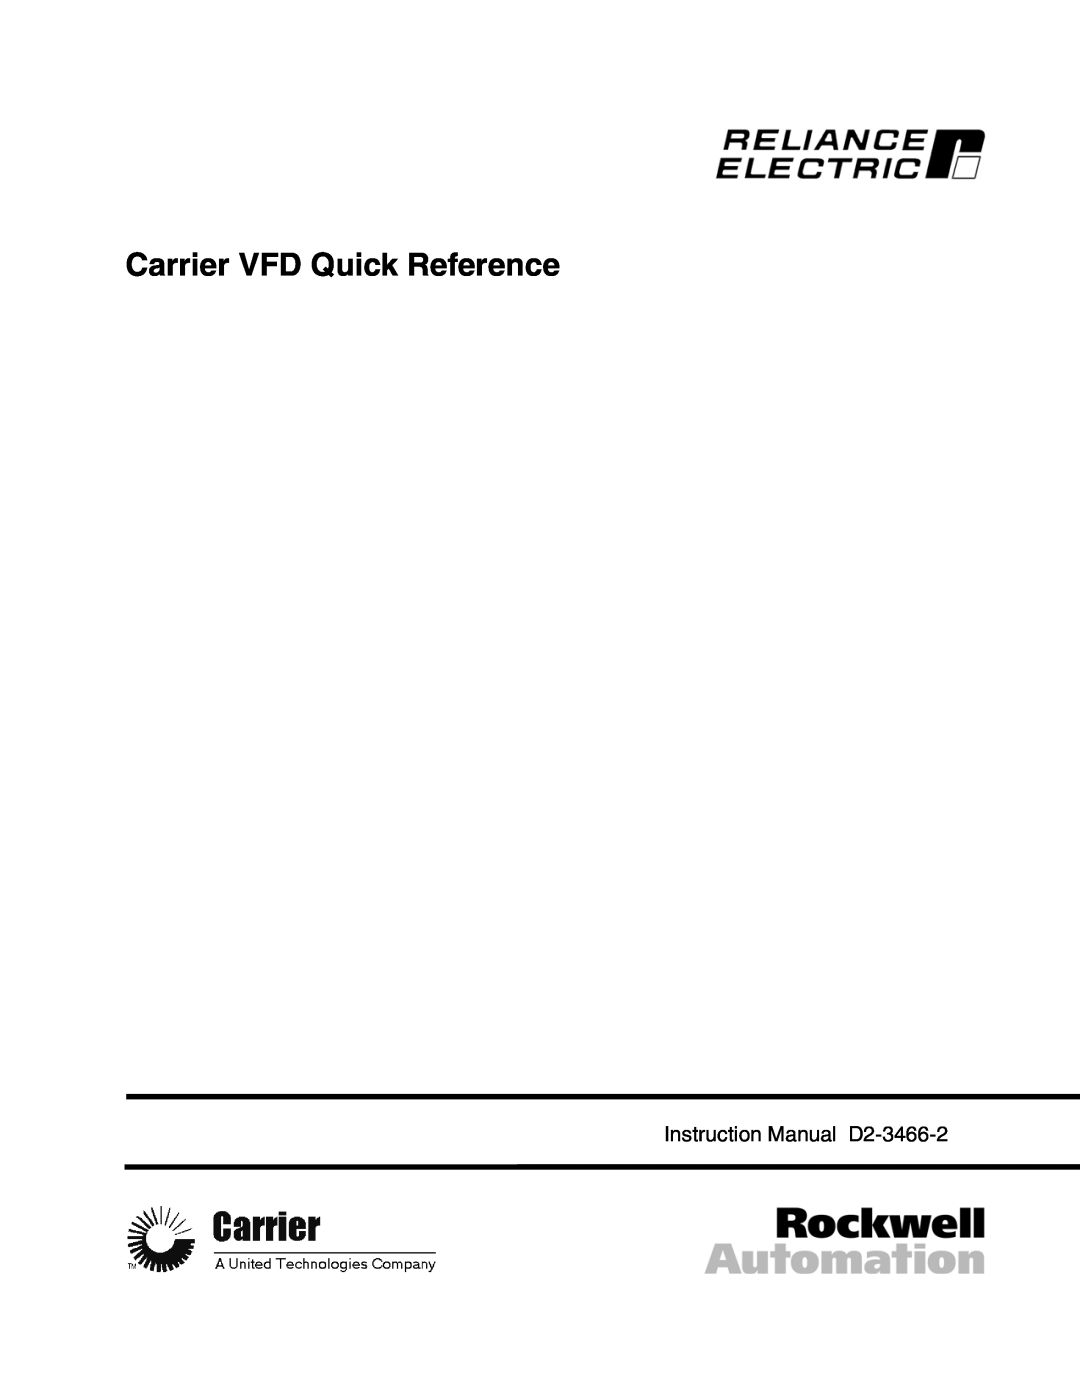 Carrier instruction manual Carrier VFD Quick Reference, Instruction Manual D2-3466-2 